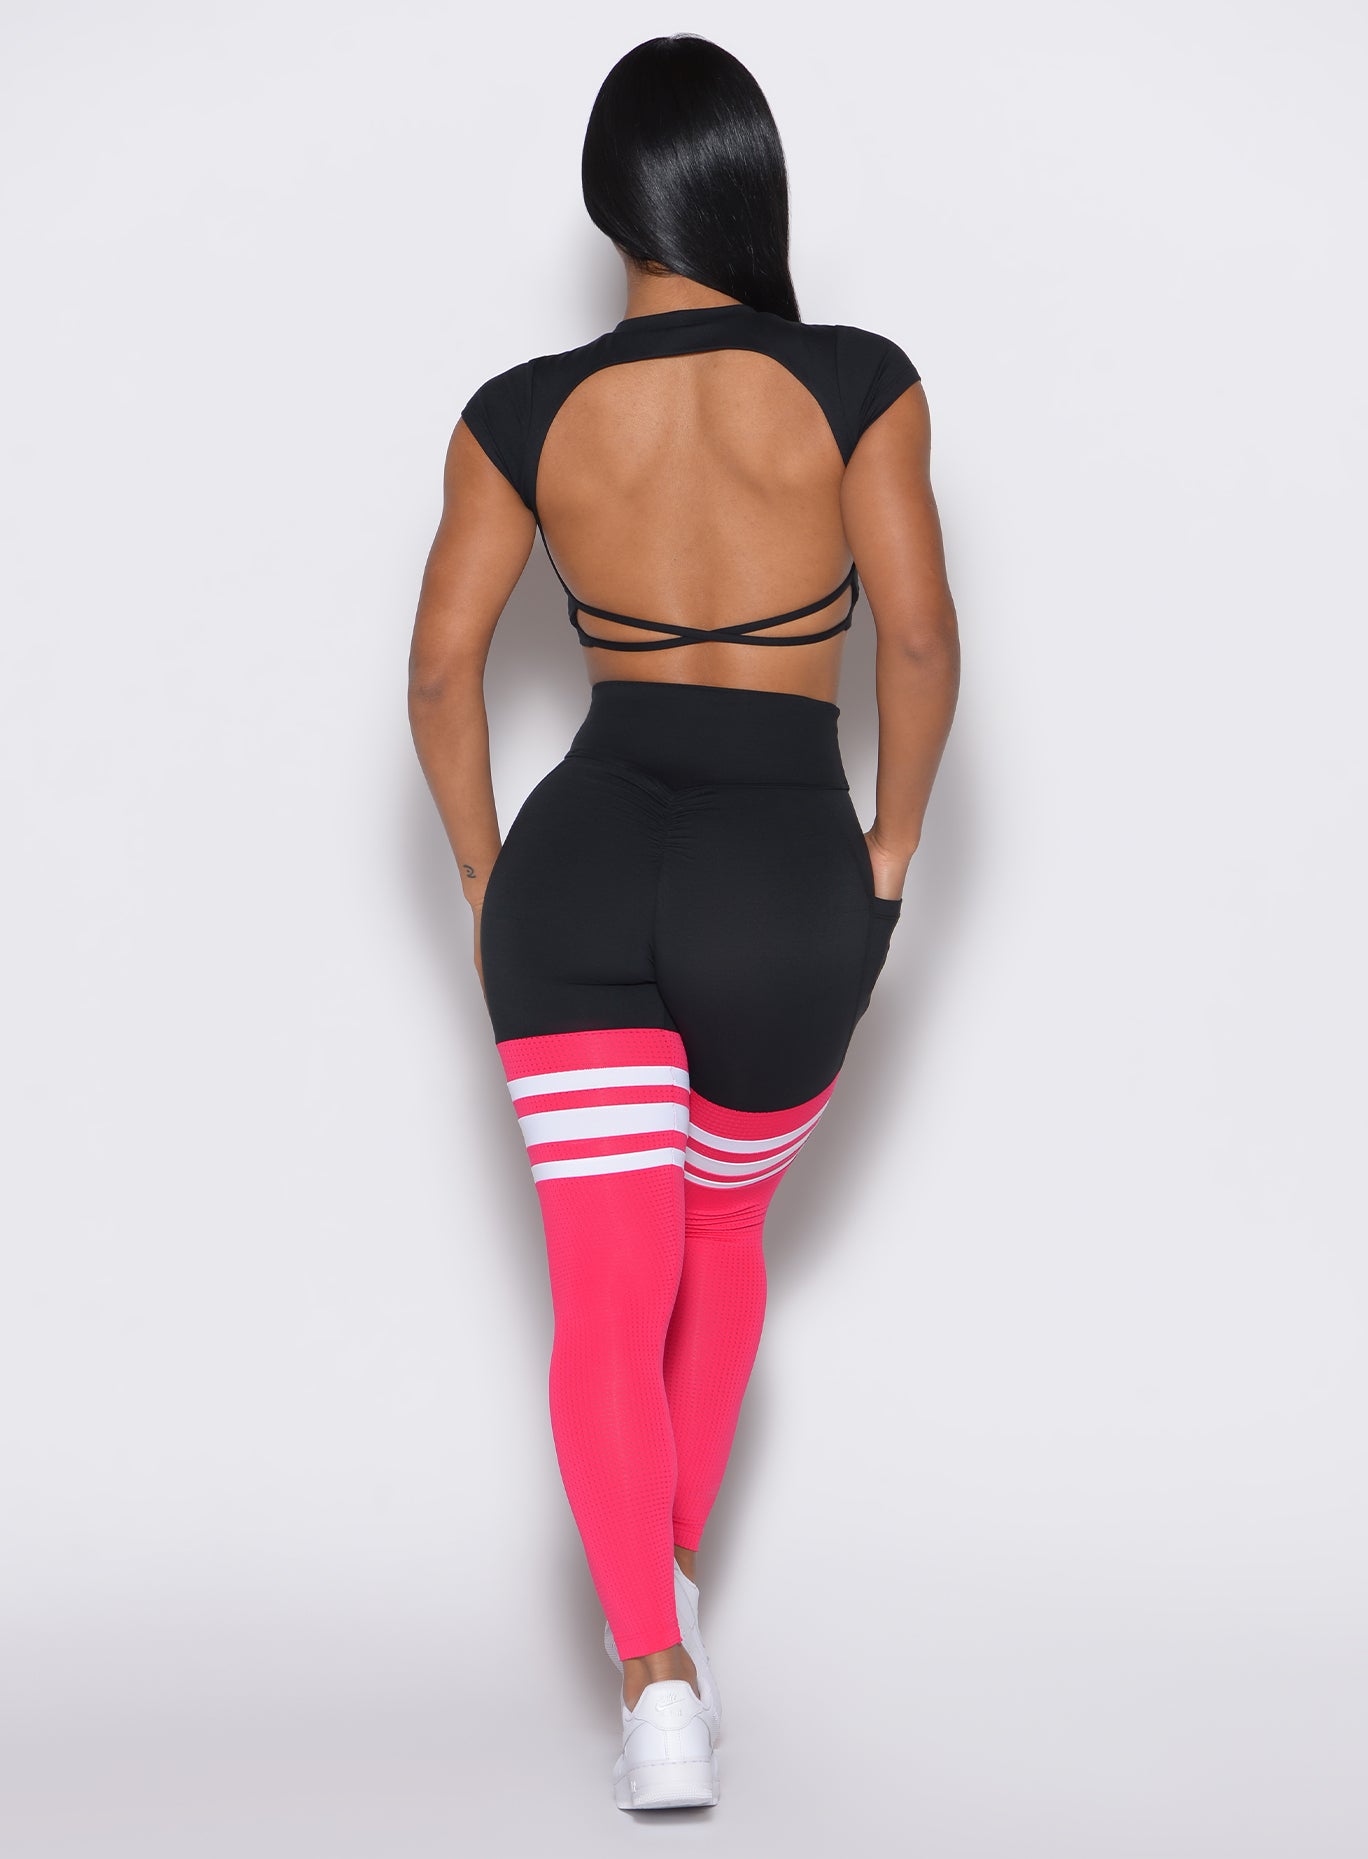 Back profile view of a model wearing the Scrunch Thigh Highs in Black and Berry Color along with a black tee